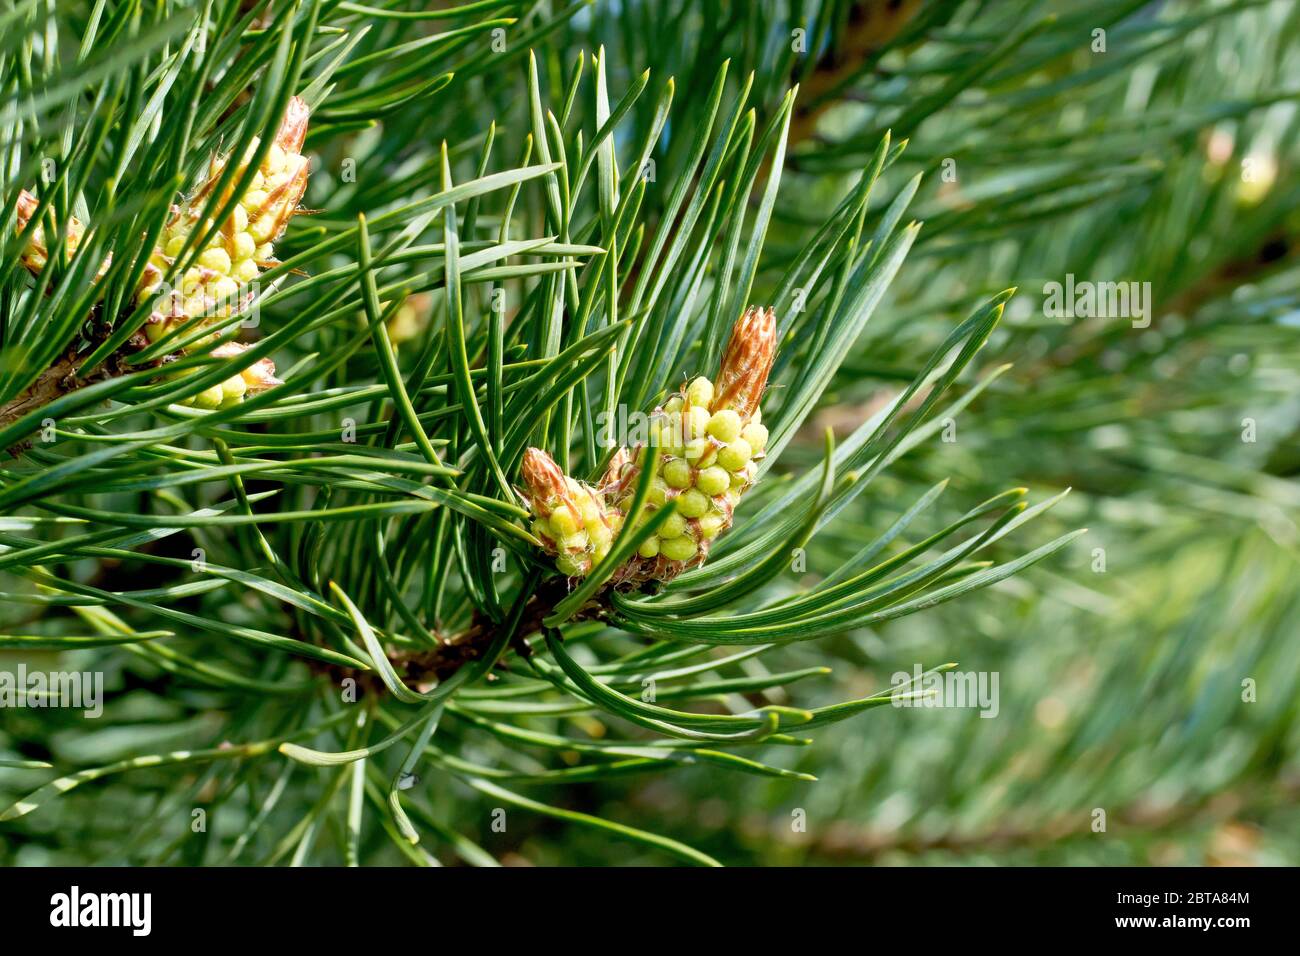 Scot's Pine (pinus sylvestris), close up showing the male flowers beginning to bloom at the end of a branch. Stock Photo